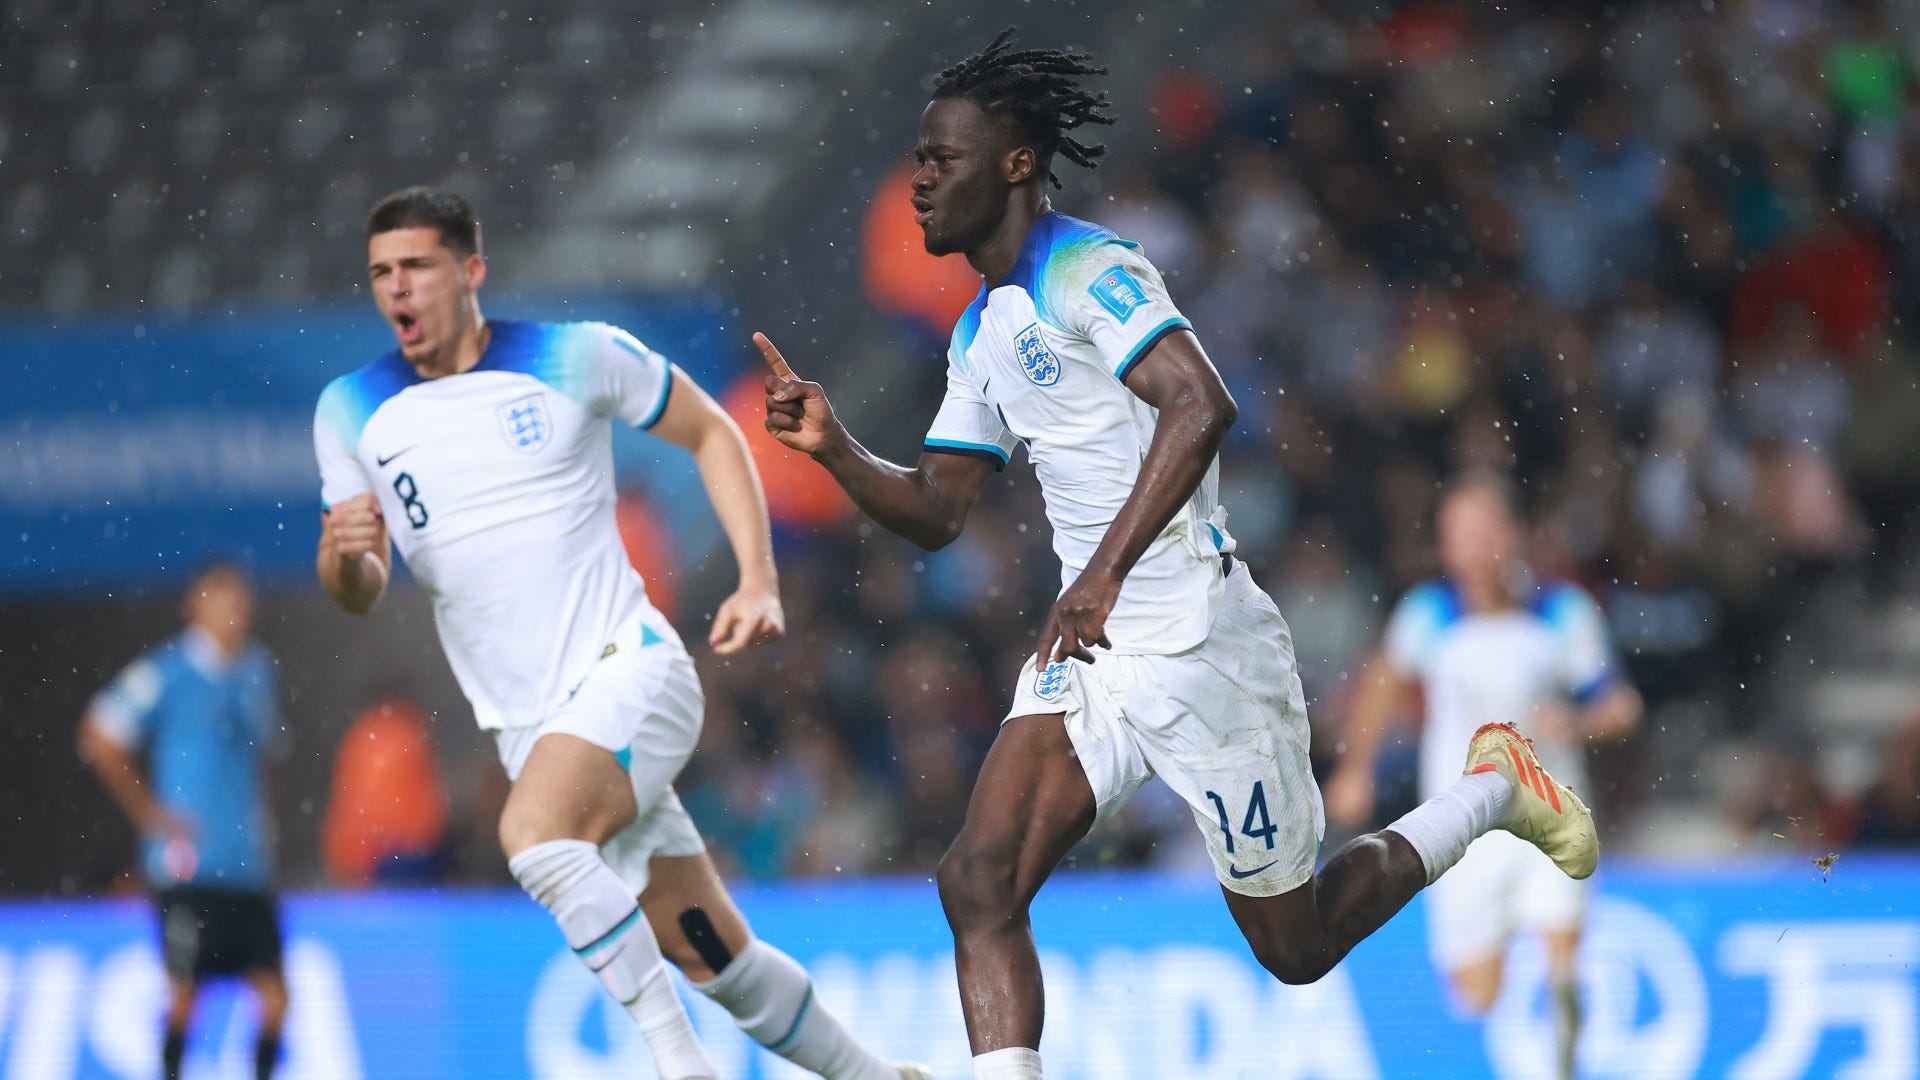 England U20 vs Italy U20 Live stream, TV channel, kick-off time and where to watch Goal US